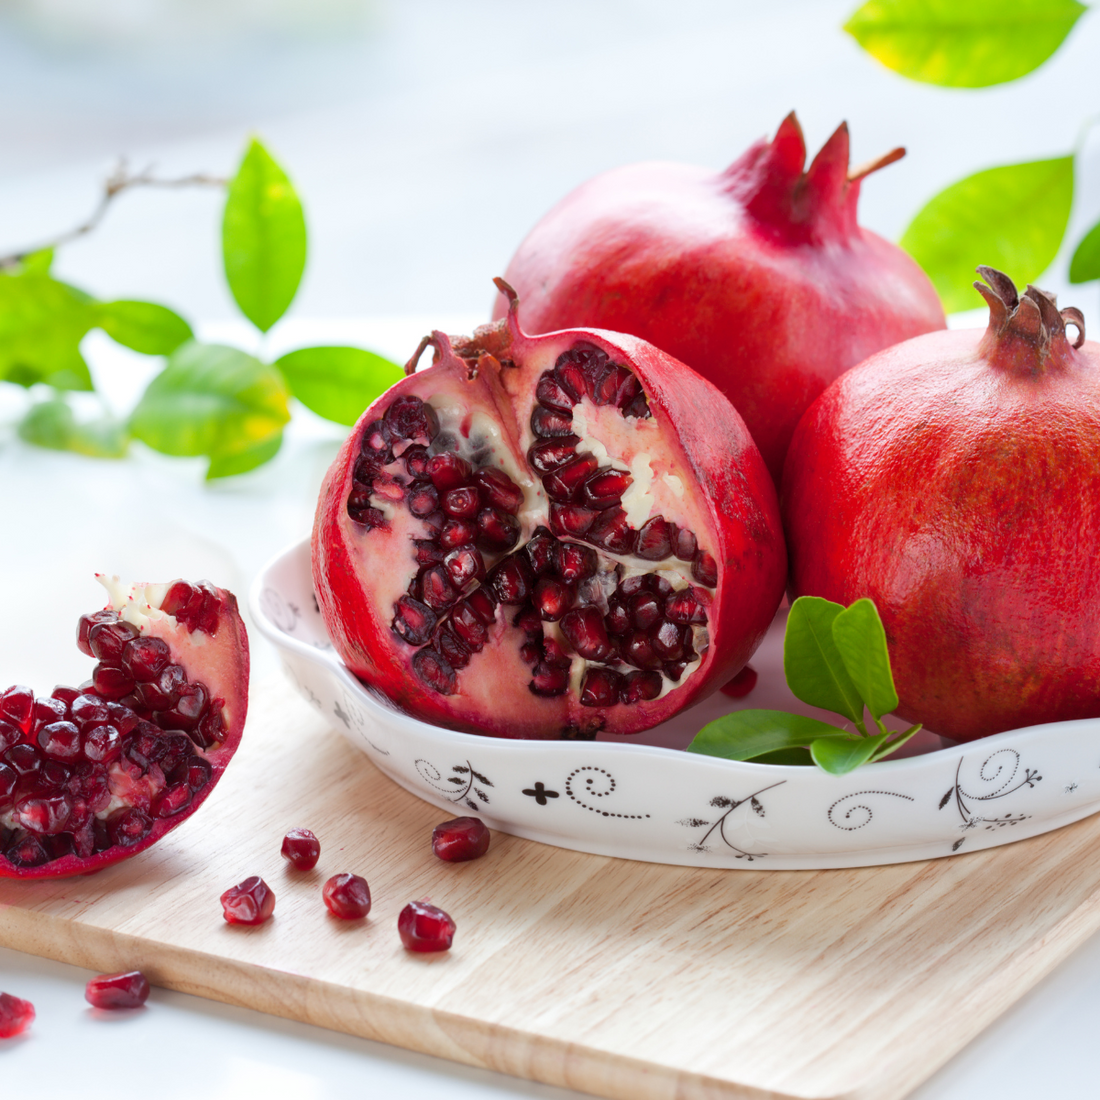 How To Cut a Pomegranate And Best Ways To Eat It